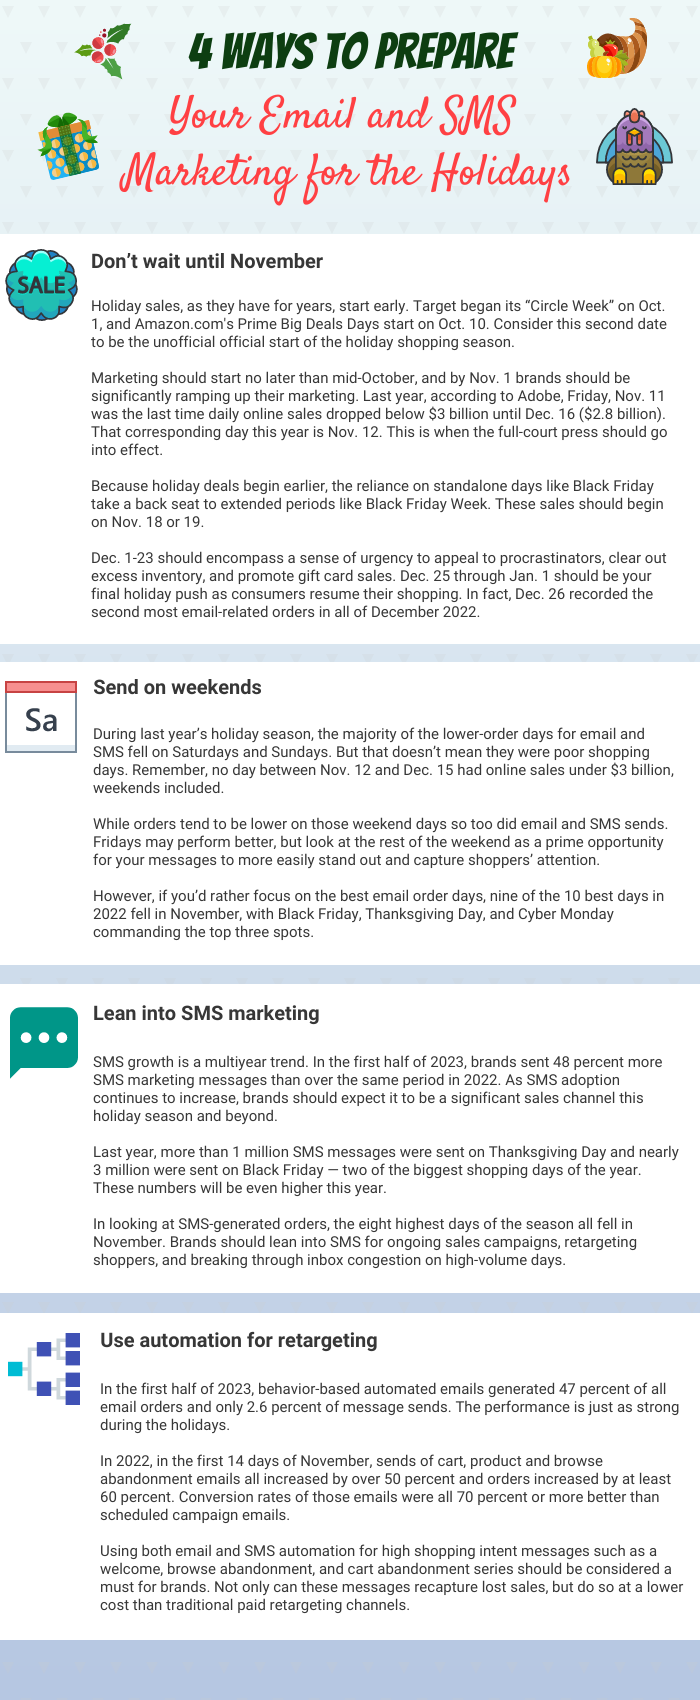 4 Ways to Prepare Your Email and SMS Marketing for the Holidays